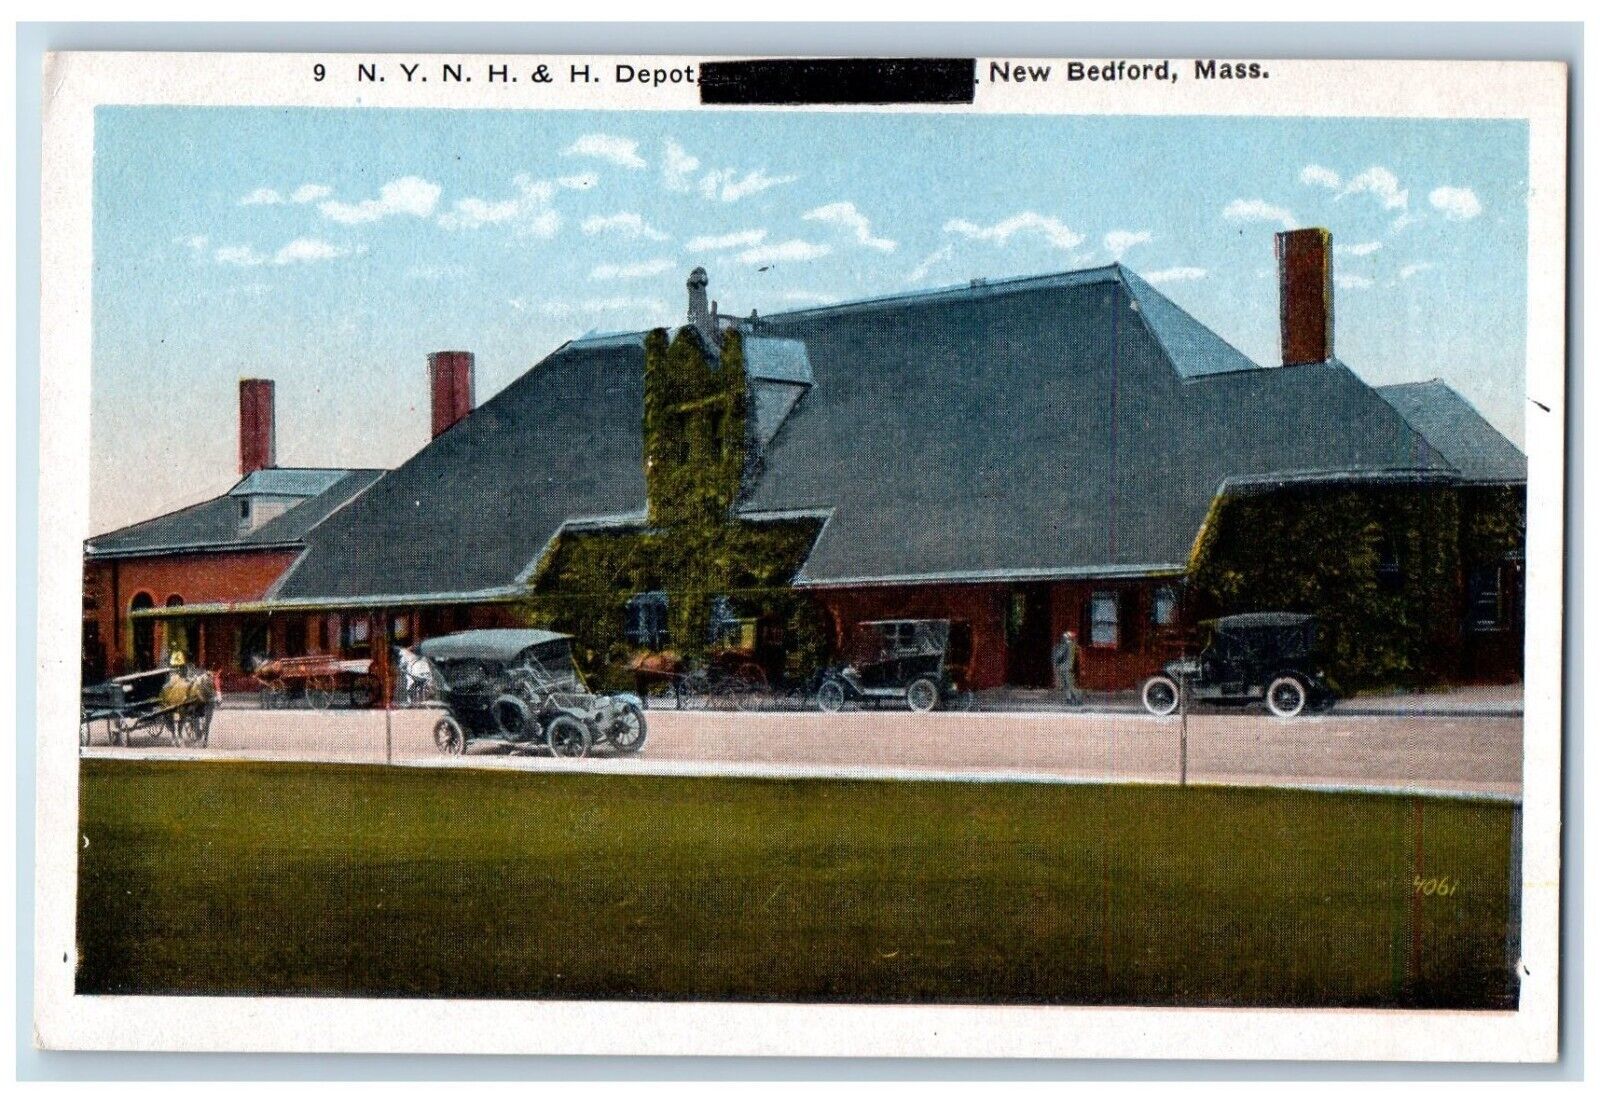 New Bedford Massachusetts Postcard NYNH Depot Exterior View 1920 Vintage Antique